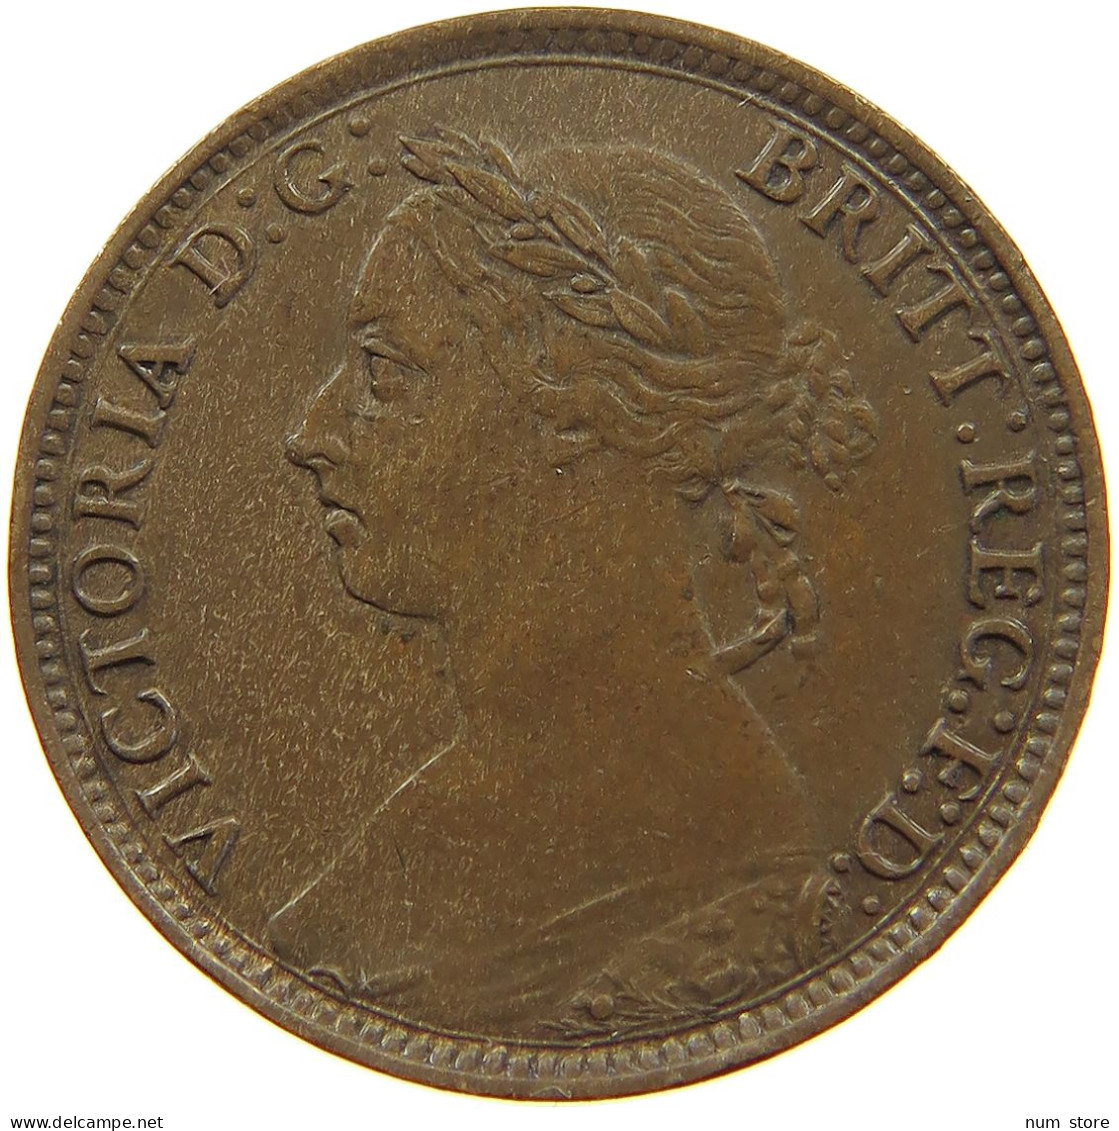 GREAT BRITAIN FARTHING 1893 Victoria 1837-1901 #a011 0795 - B. 1 Farthing